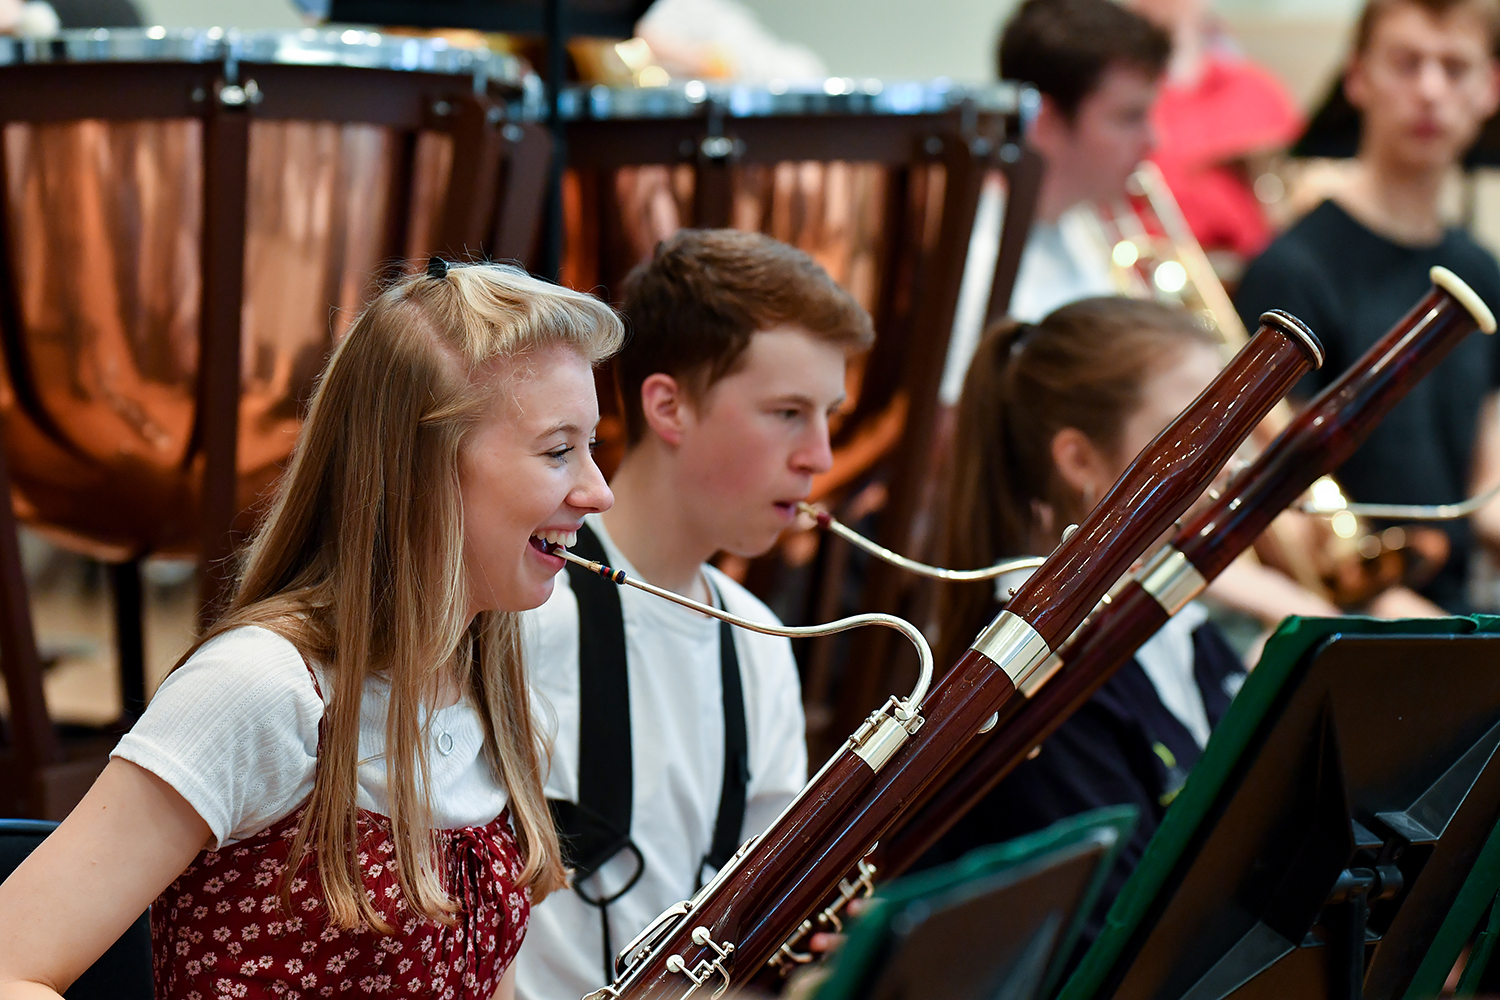 A woman smiles whilst playing the bassoon with another bassoonists playing sitting next to her